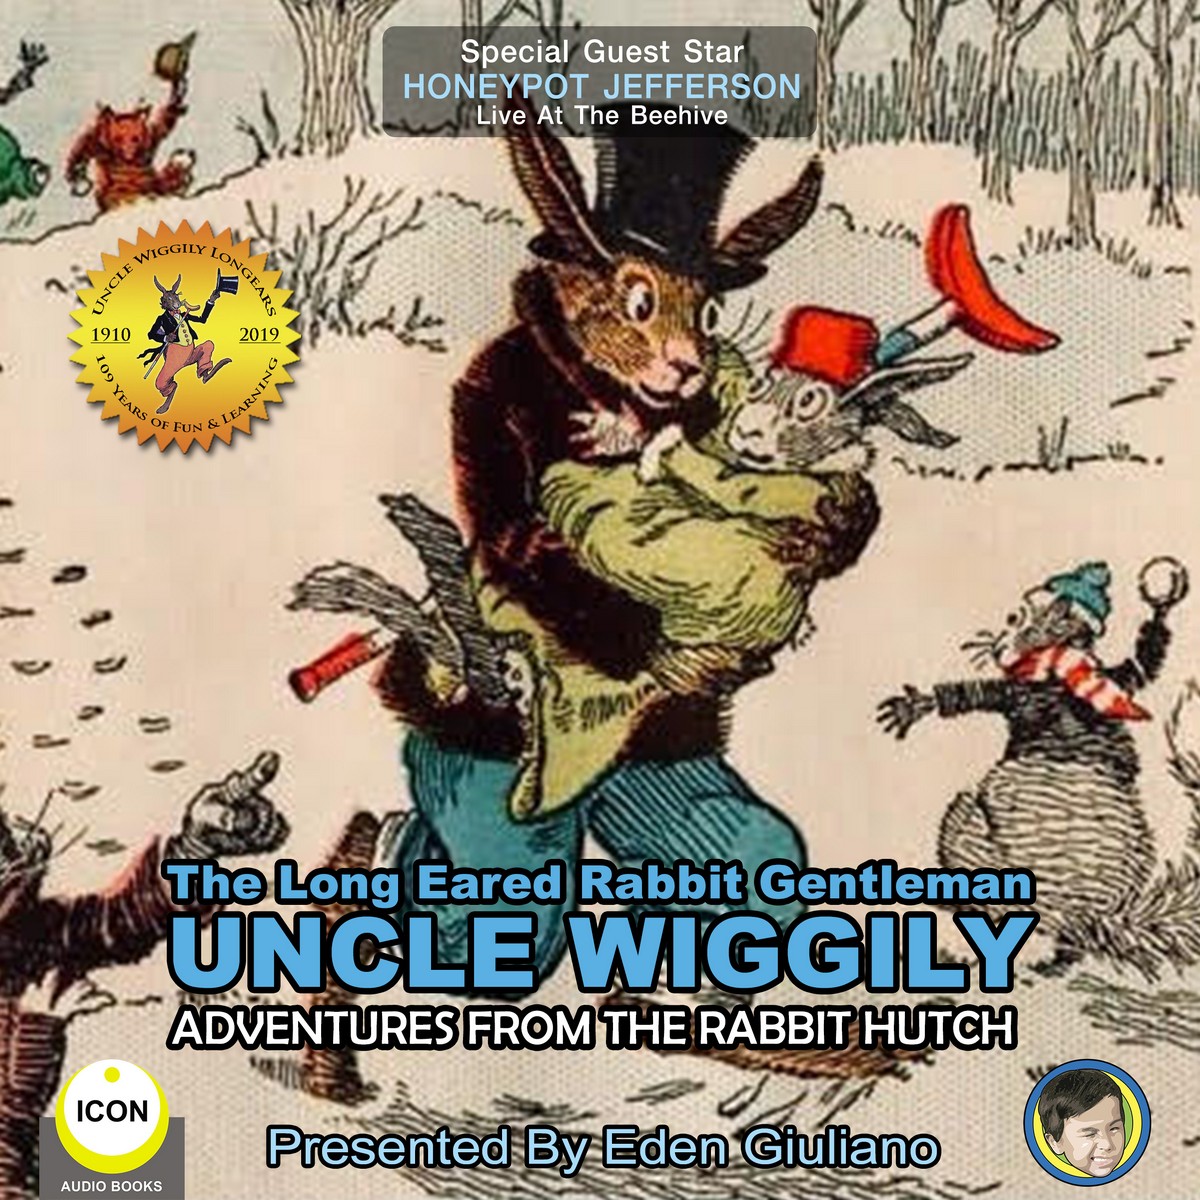 The Long Eared Rabbit Gentleman Uncle Wiggily – Adventures From The Rabbit Hutch